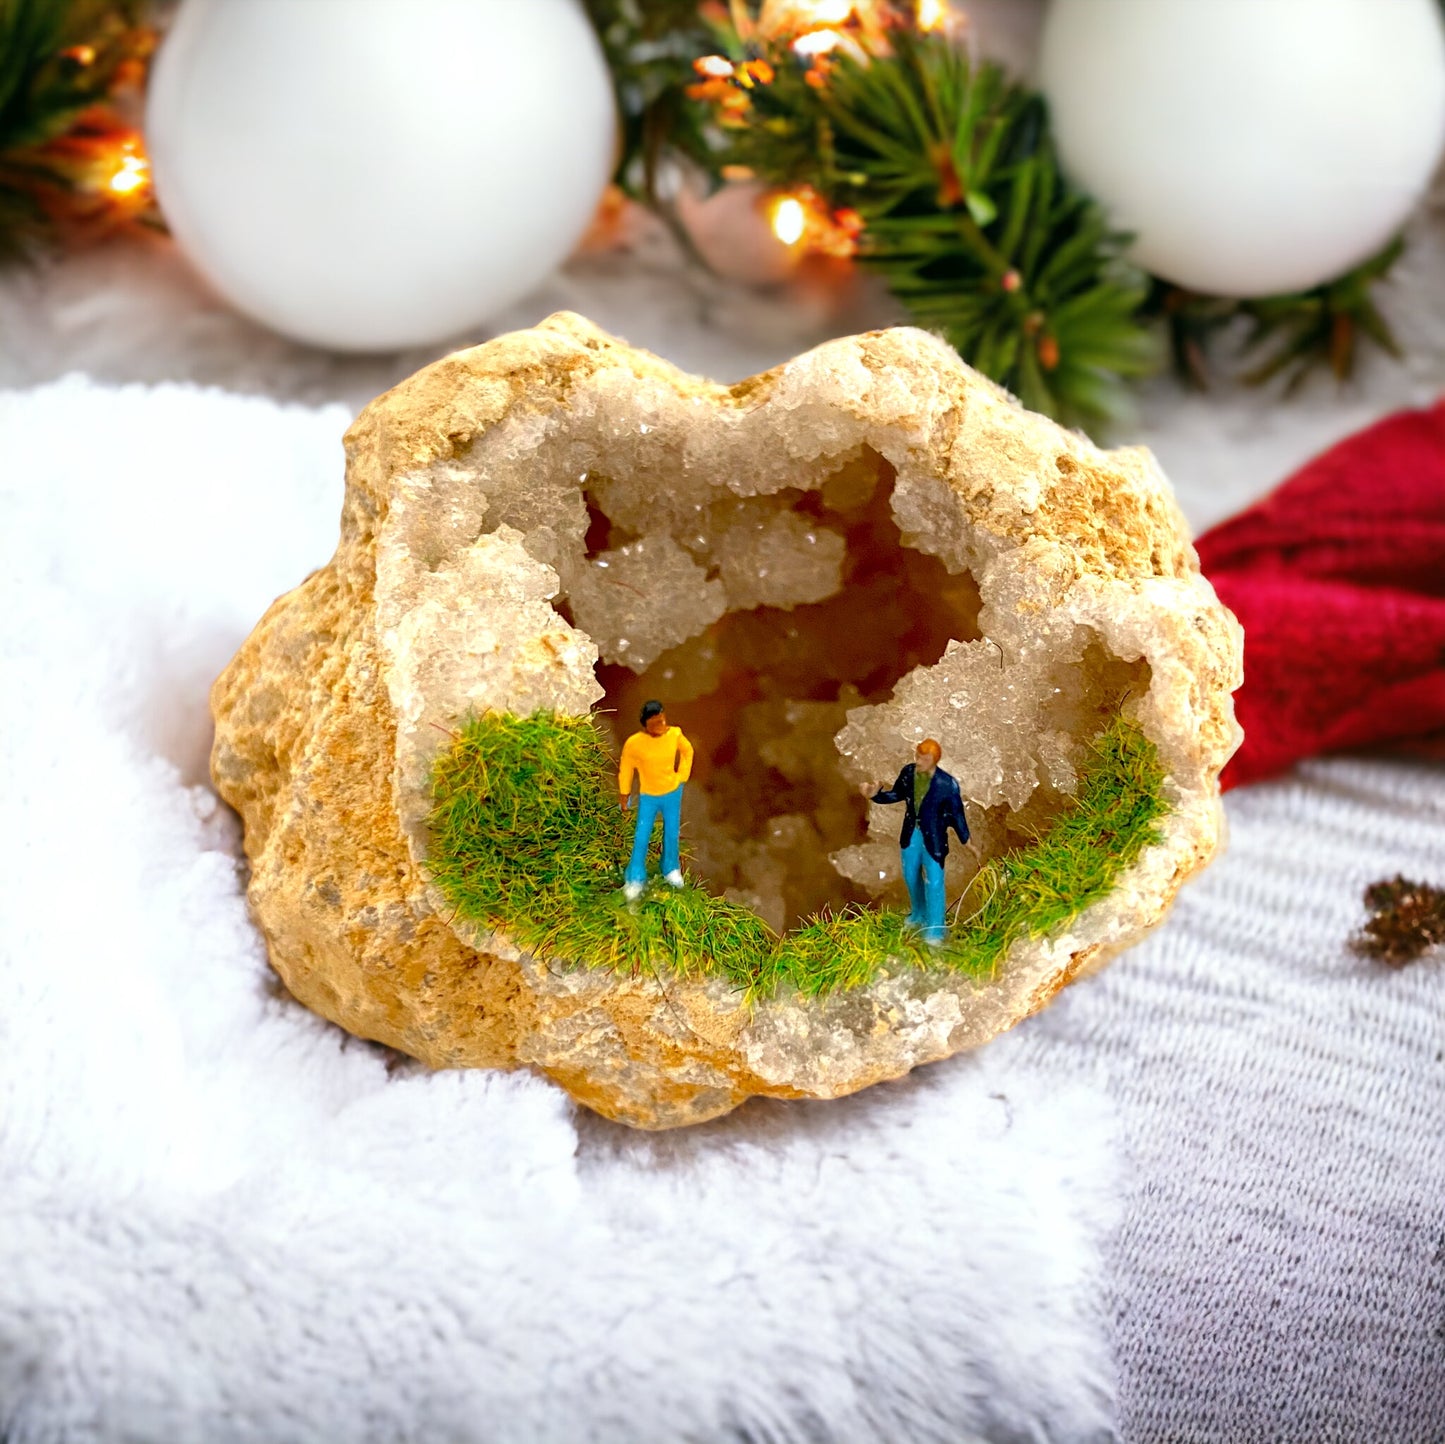 Geode Art piece w/ tiny people at “crystal cave entrance”